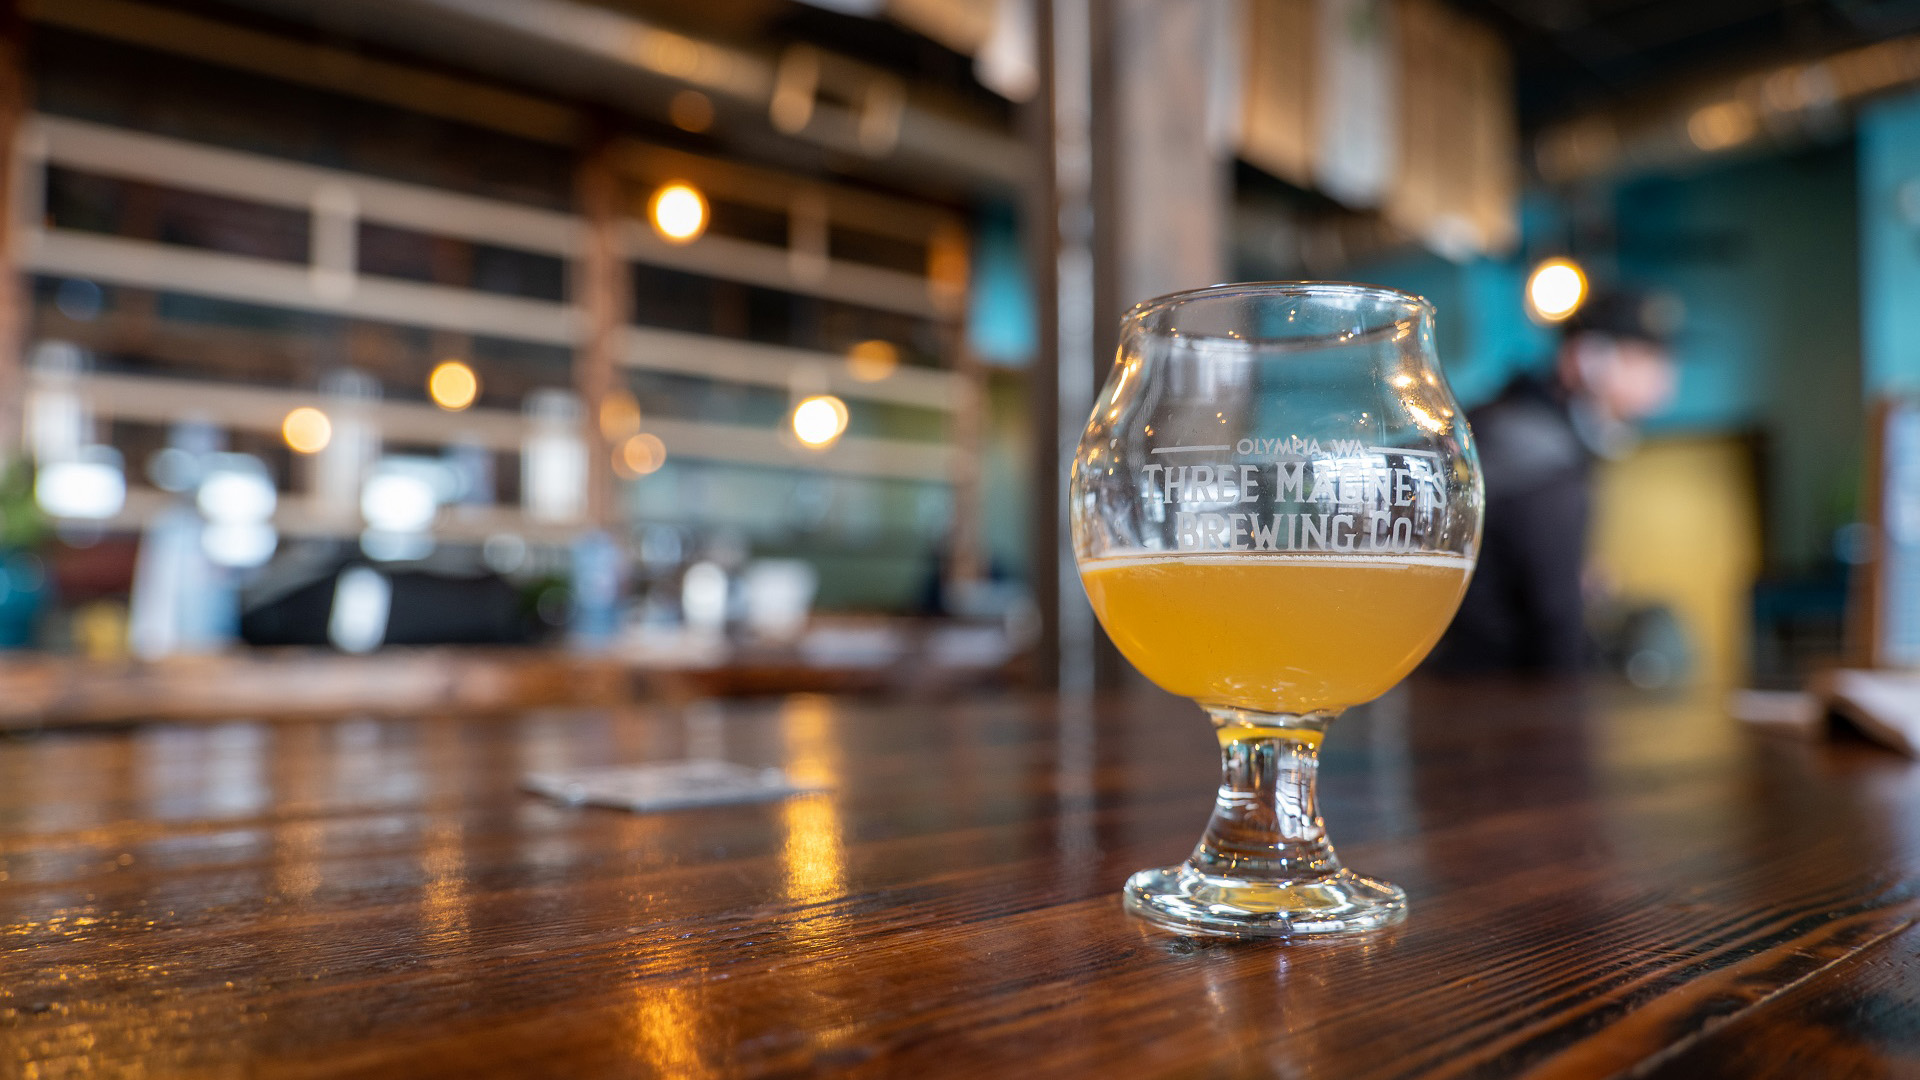 A tasting glass of beer in the Three Magnets Brewing Co. taproom